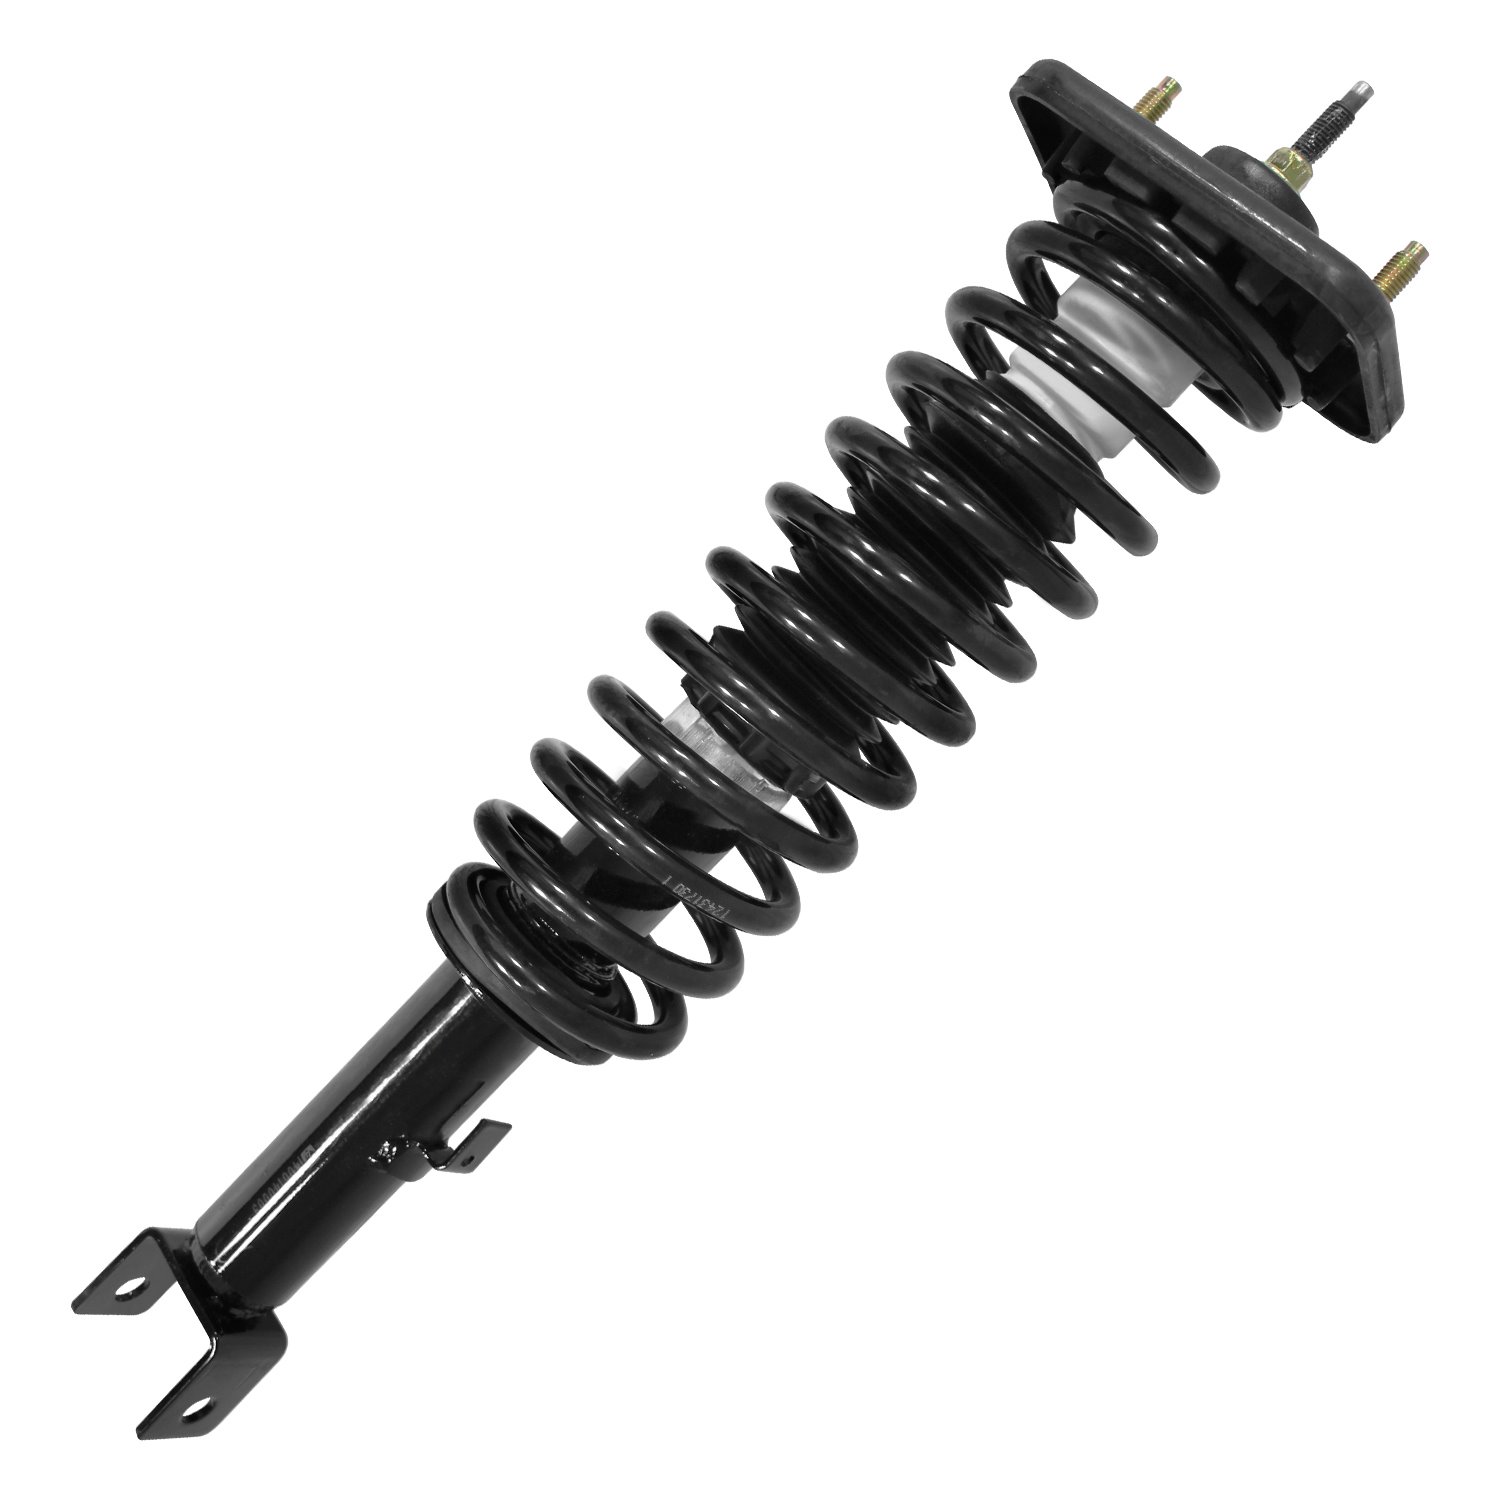 15370 Suspension Strut & Coil Spring Assembly Fits Select Chrysler Cirrus, Dodge Stratus, Plymouth Breeze